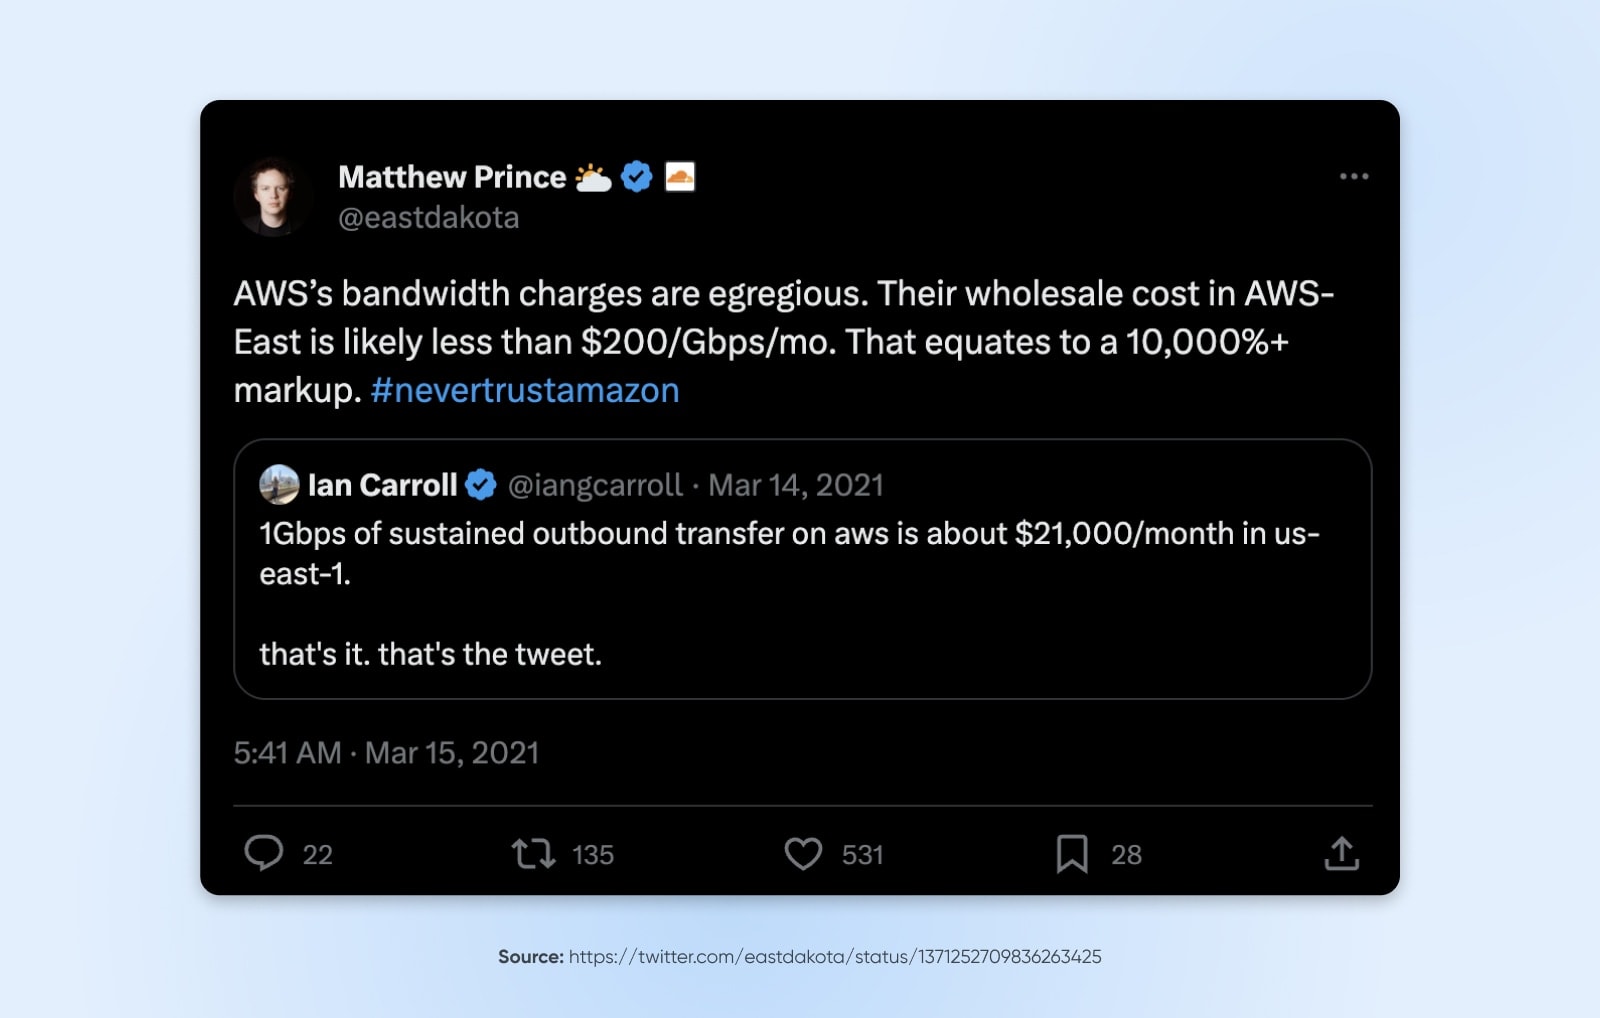 Twitter screenshot of Matthew Price post saying "AWS's bandwidth charges are egregious. Their wholesale cost in AWS-East is likely less than $200/Gbps/mo. That equates to a 10,000%+ markup. #nevertrustamazon"